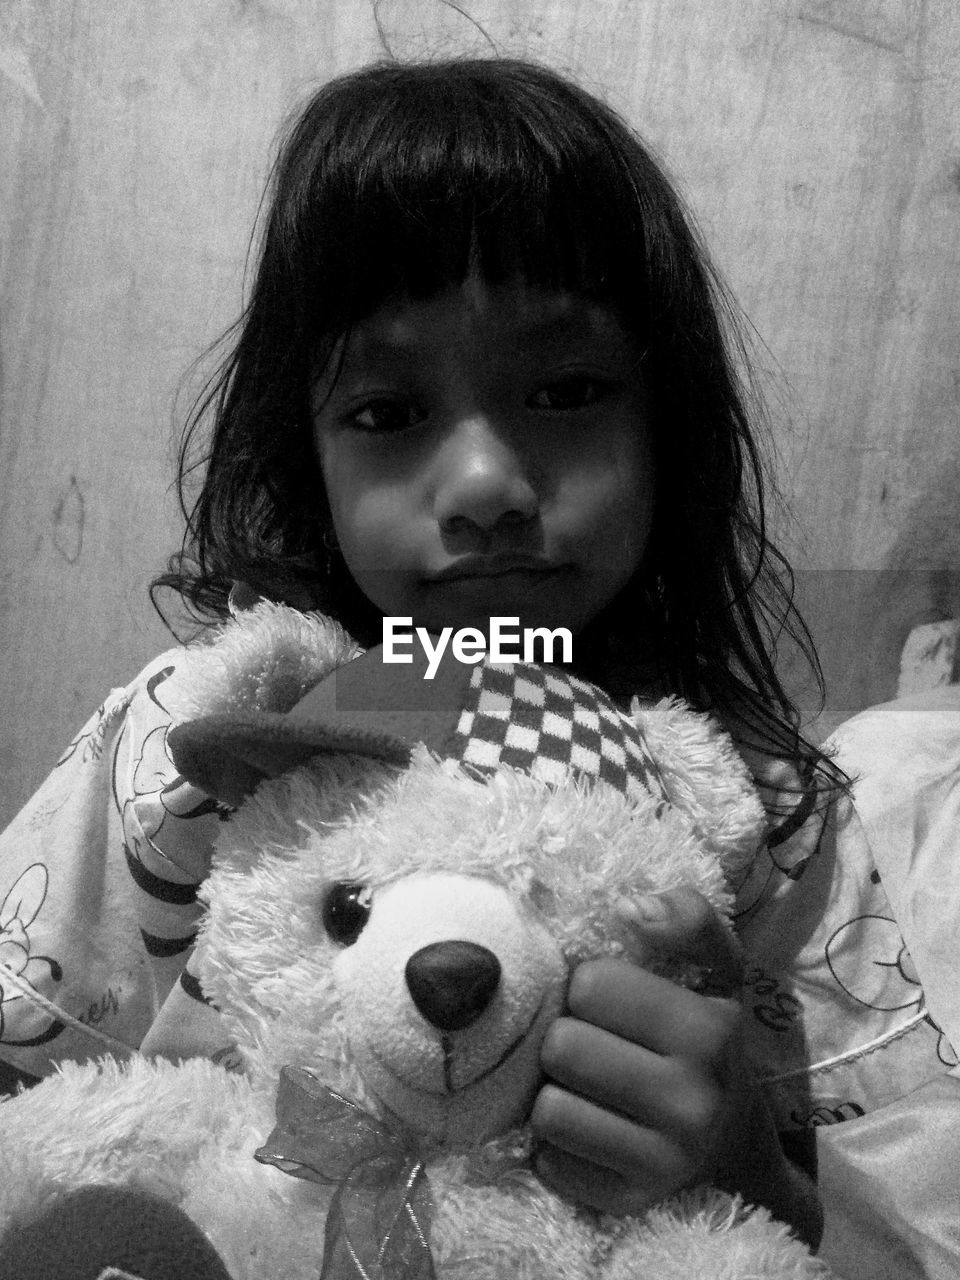 childhood, child, toy, teddy bear, one person, women, female, stuffed toy, person, portrait, black and white, baby, monochrome photography, white, black, indoors, monochrome, front view, human face, holding, looking at camera, cute, lifestyles, toddler, human head, nose, representation, headshot, innocence, emotion, animal representation, waist up